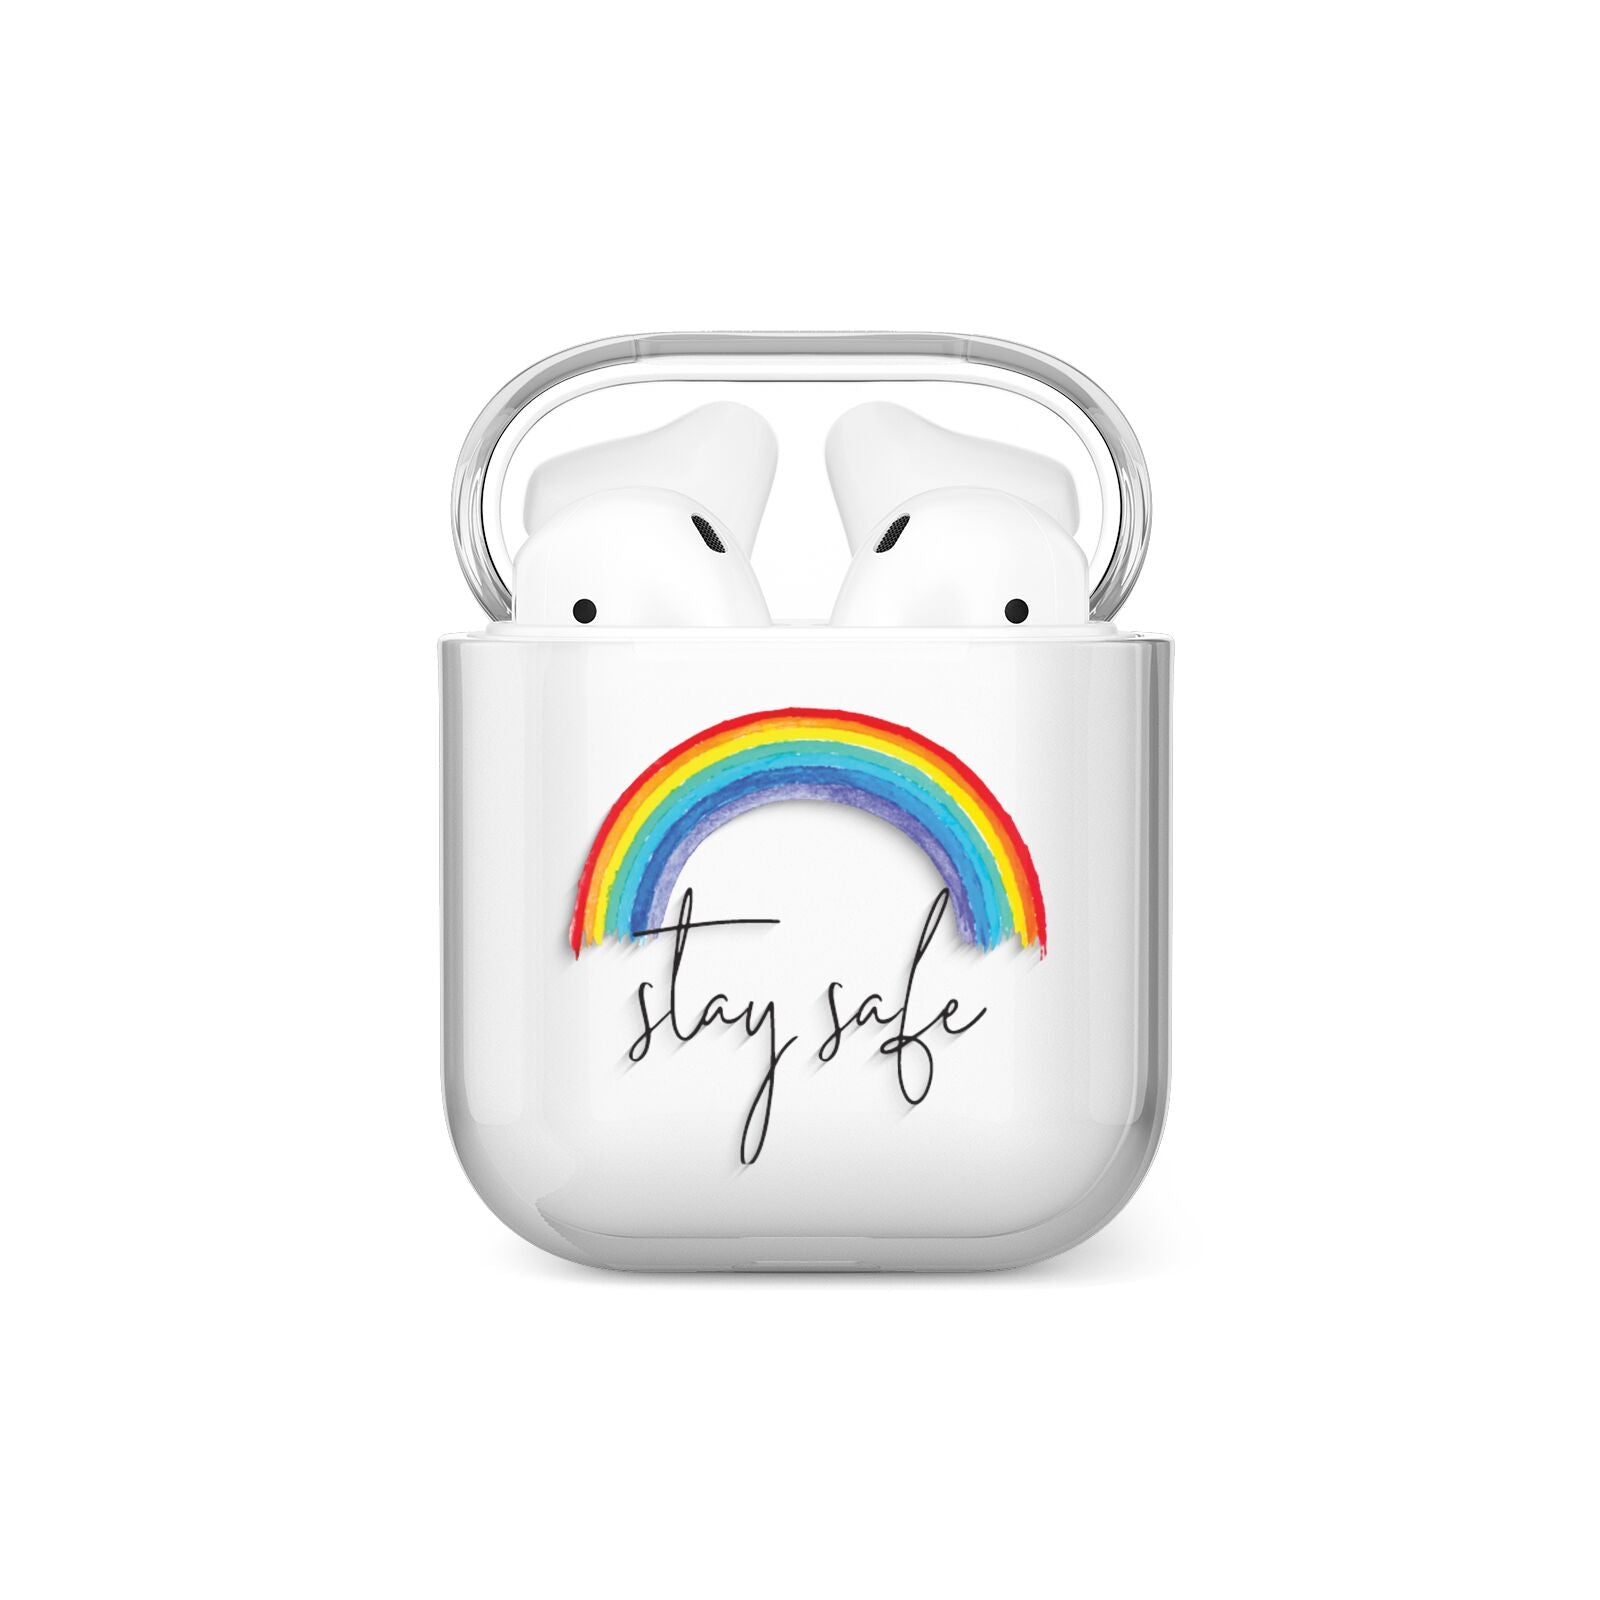 Stay Safe Rainbow AirPods Case